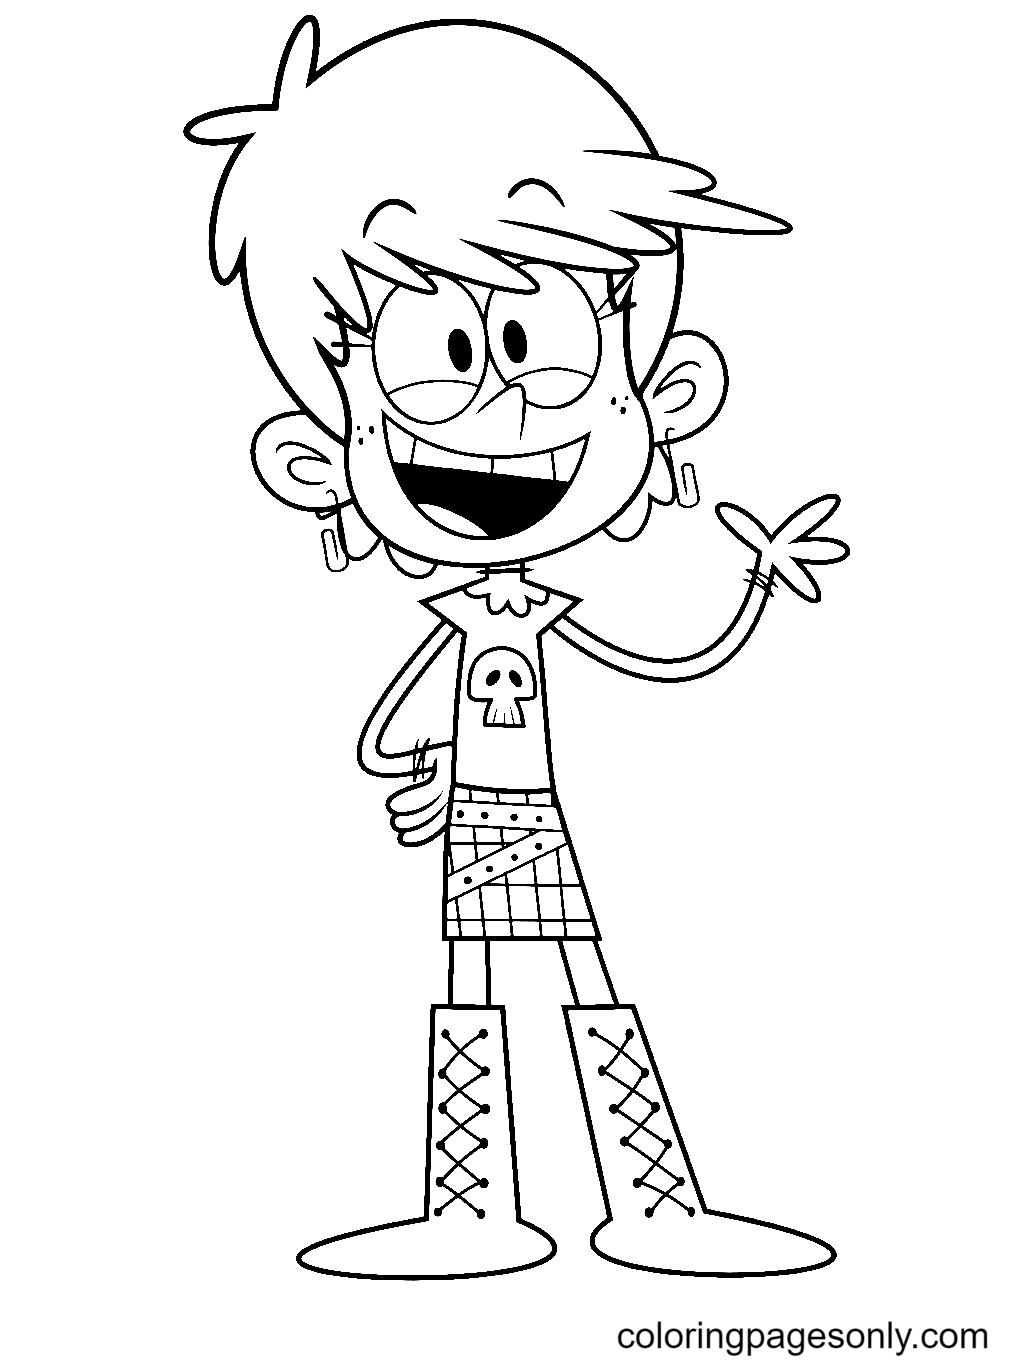 Luna Loud House from The Loud House